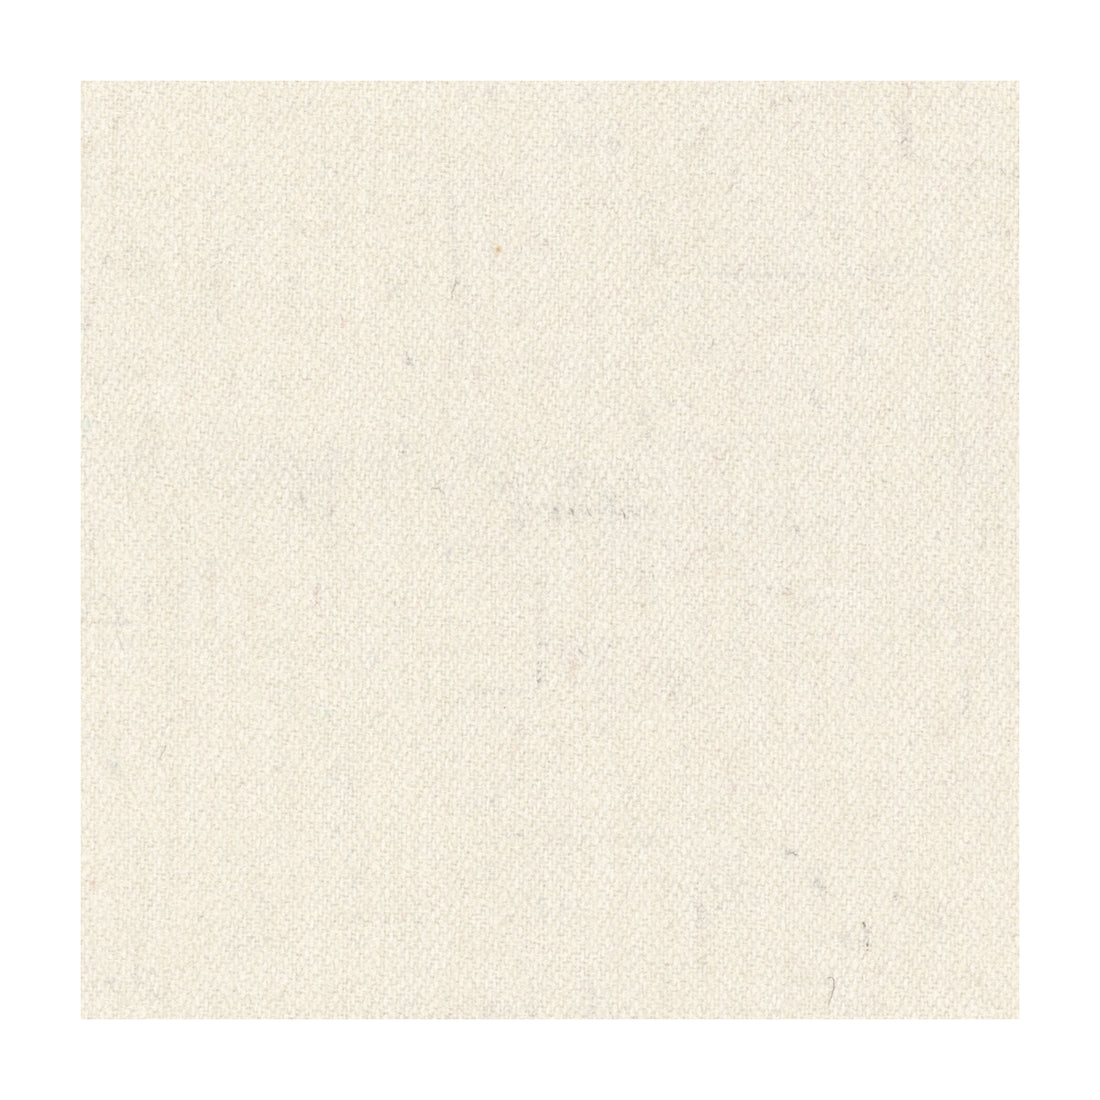 Jefferson Wool fabric in coconut color - pattern 34397.1.0 - by Kravet Contract